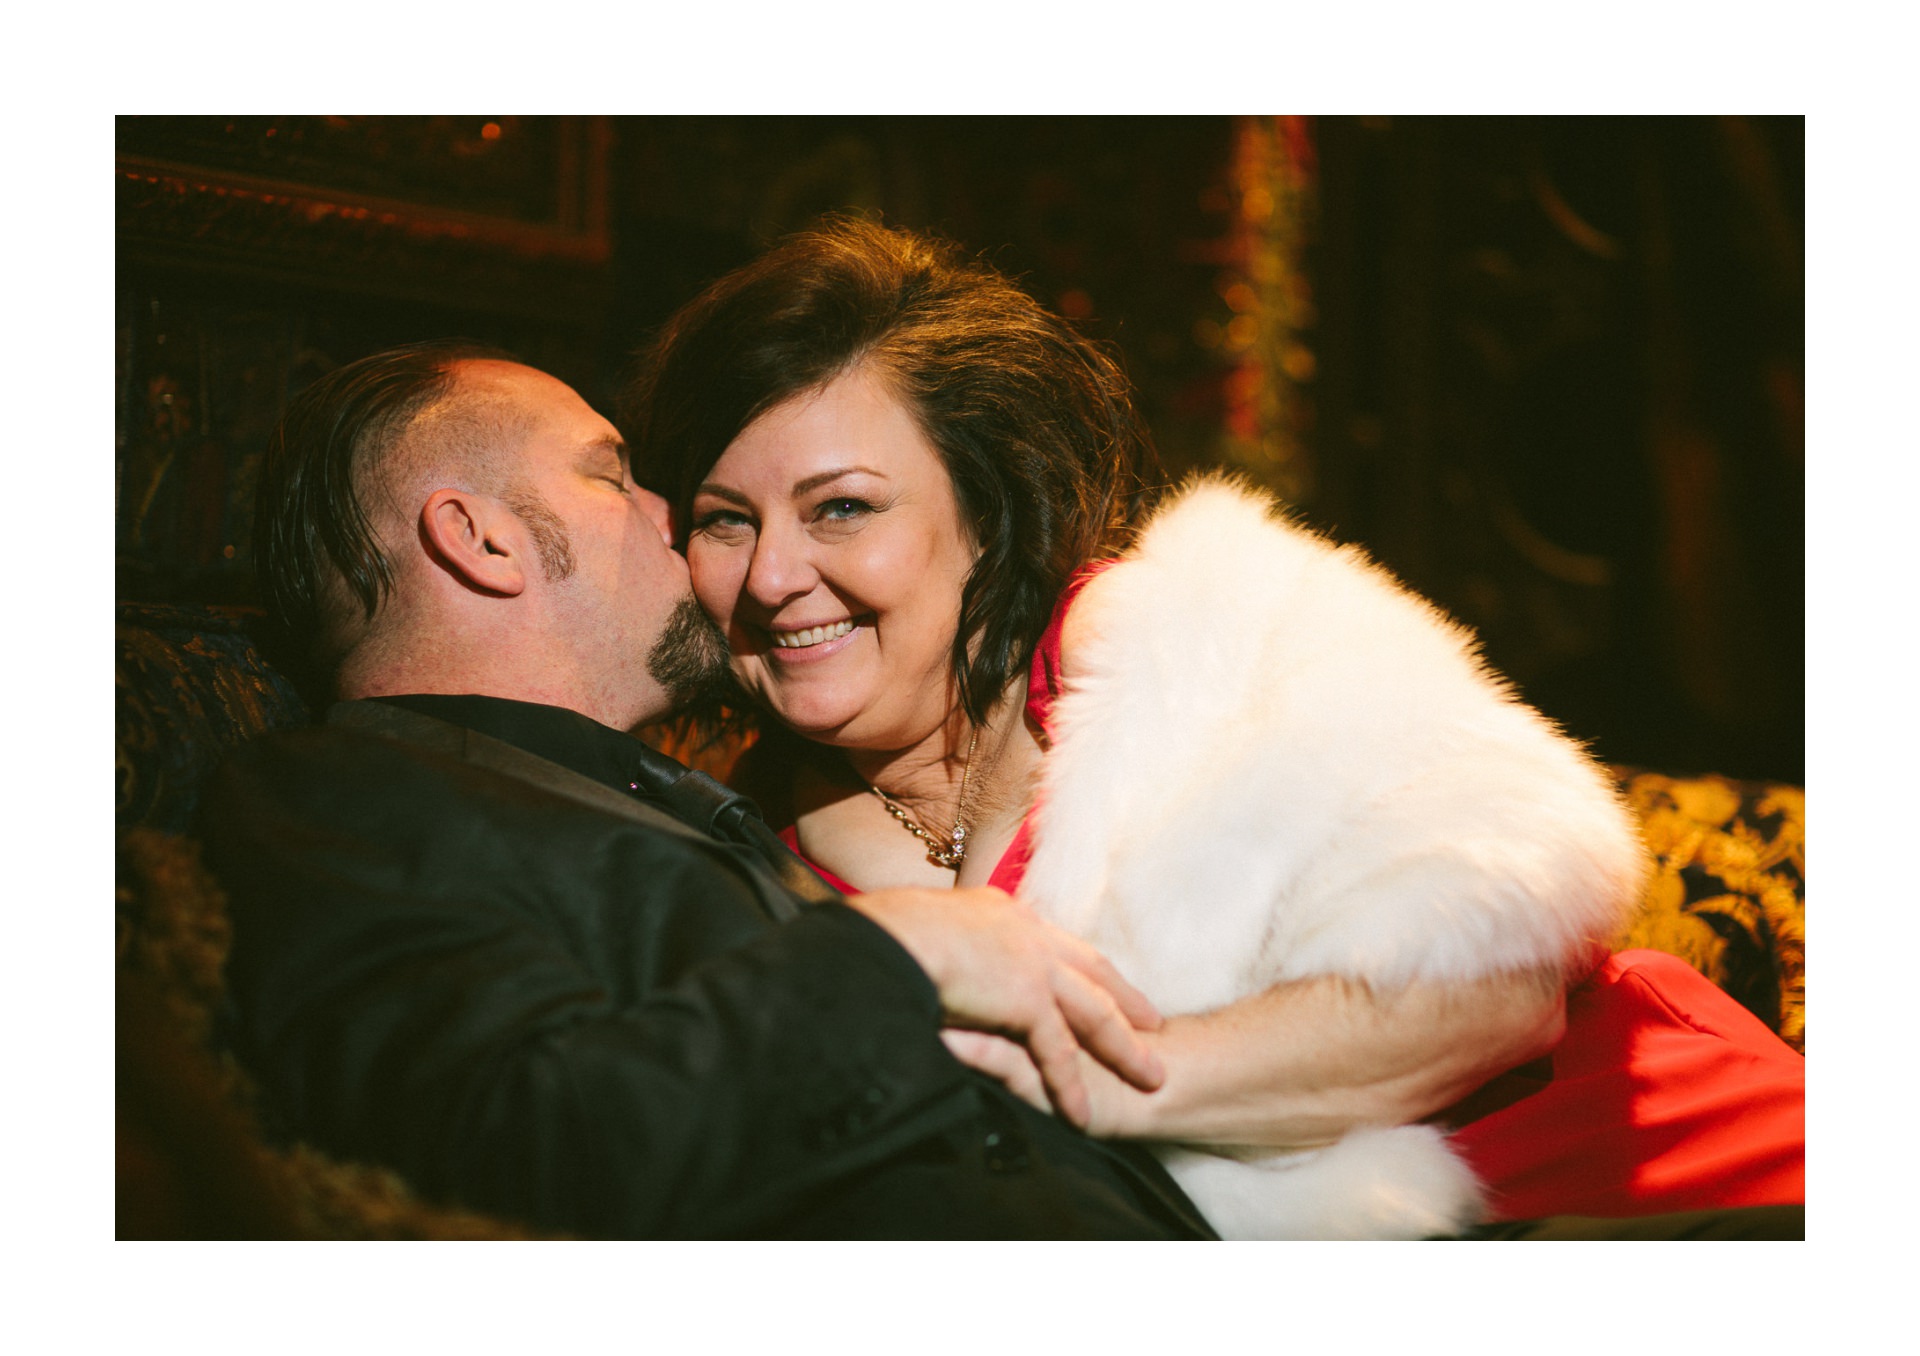 House of Blues Wedding Photographer in Downtown Cleveland 1 34.jpg